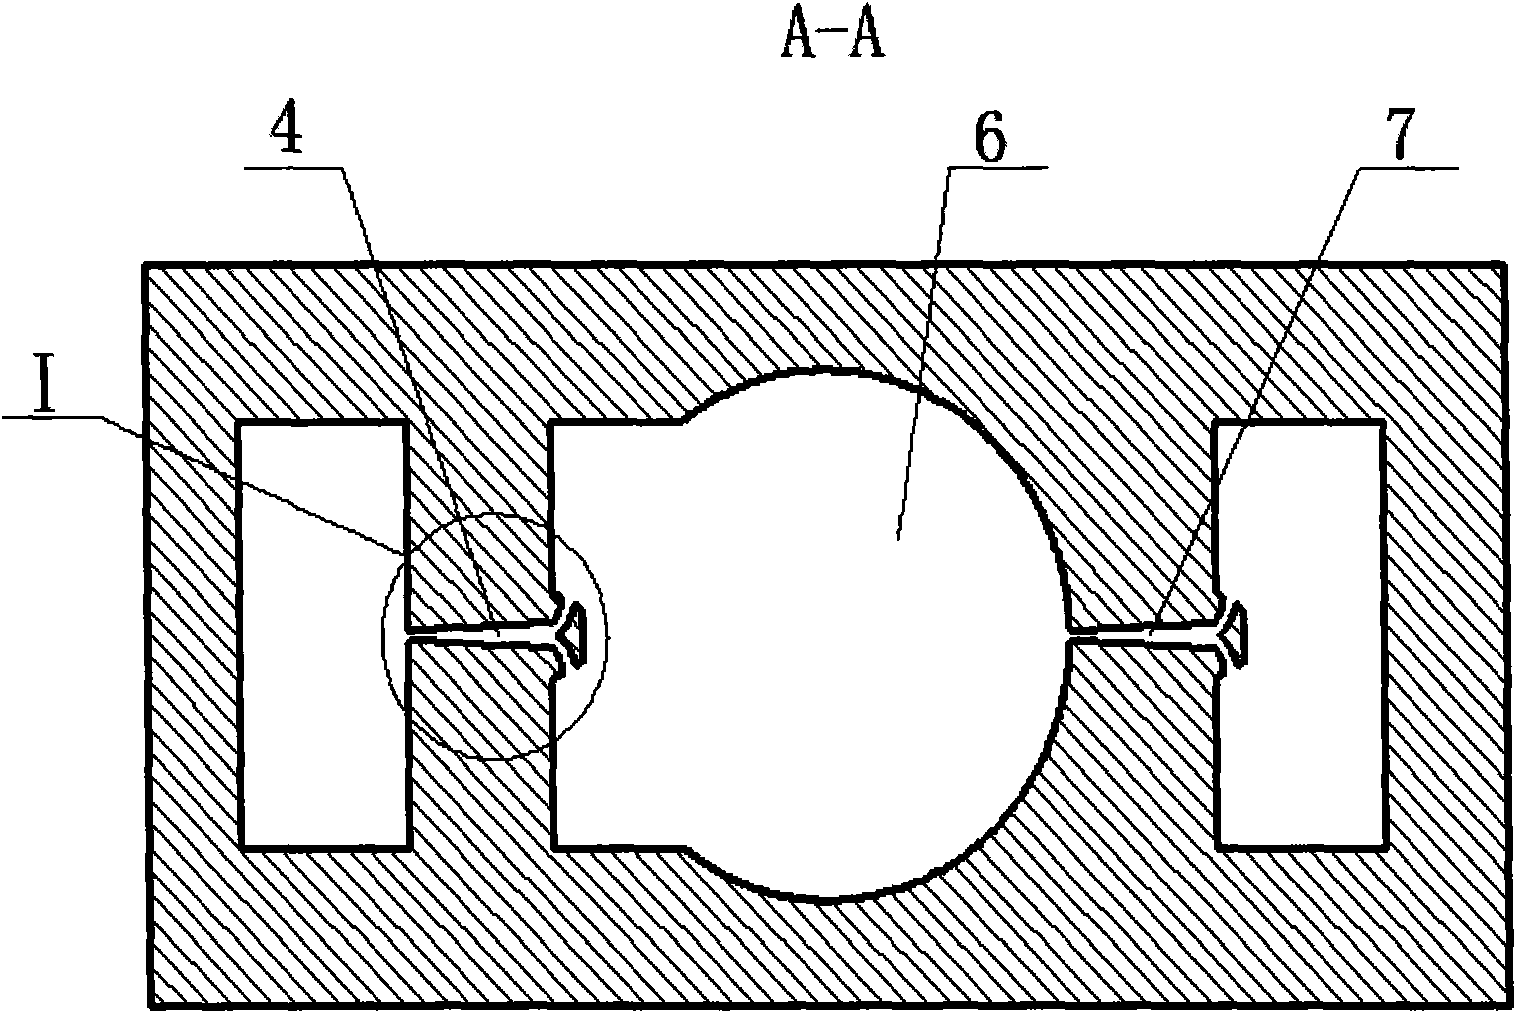 Valve-free piezoelectric pump of logarithmic spiral combined tube